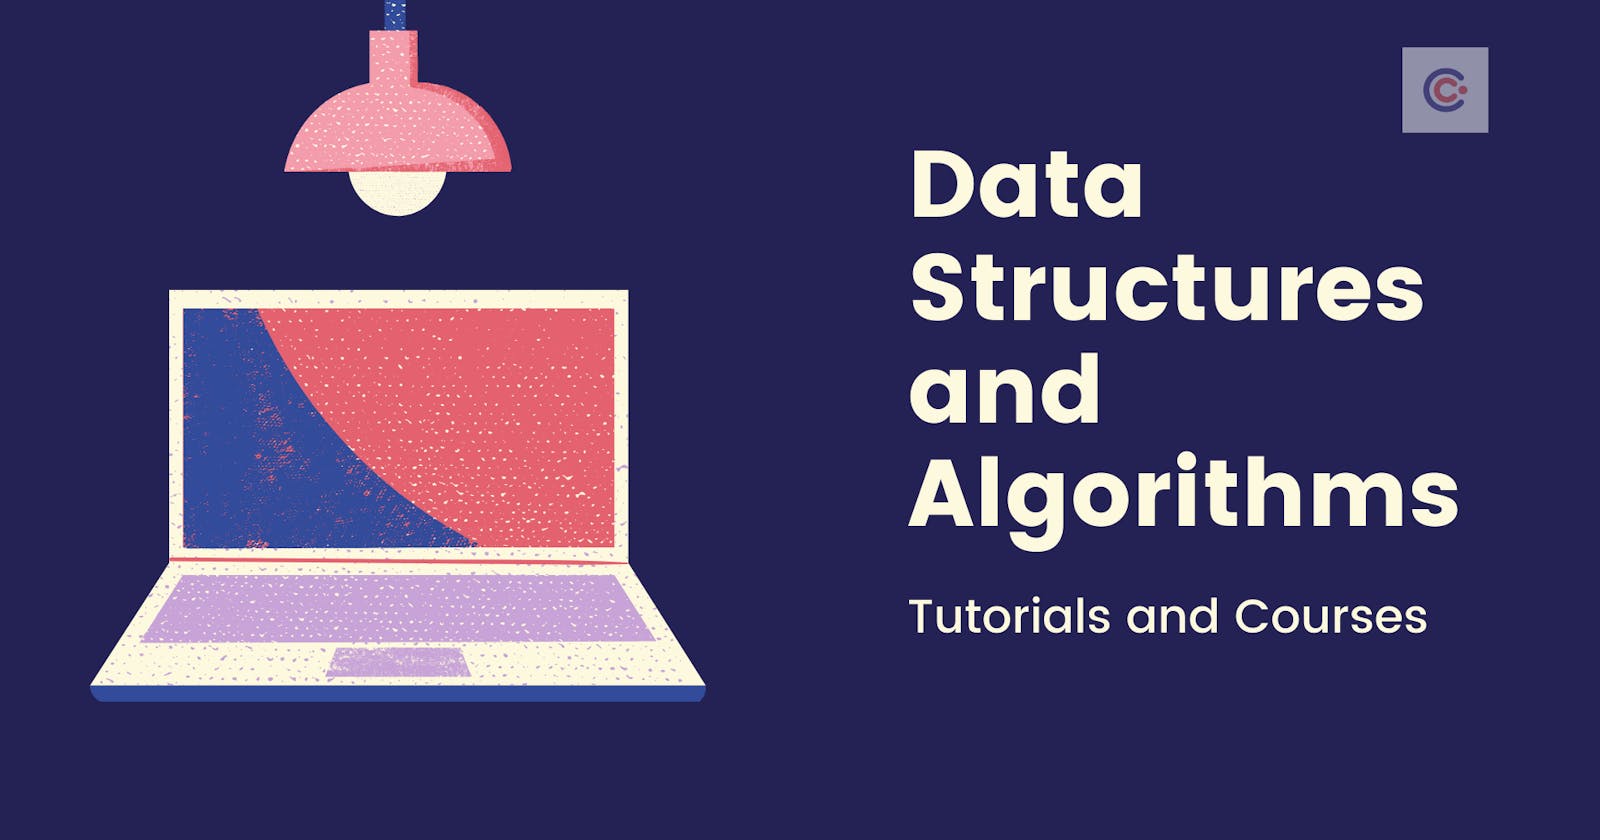 Algorithm and Data Structures 
Best Books to Refer